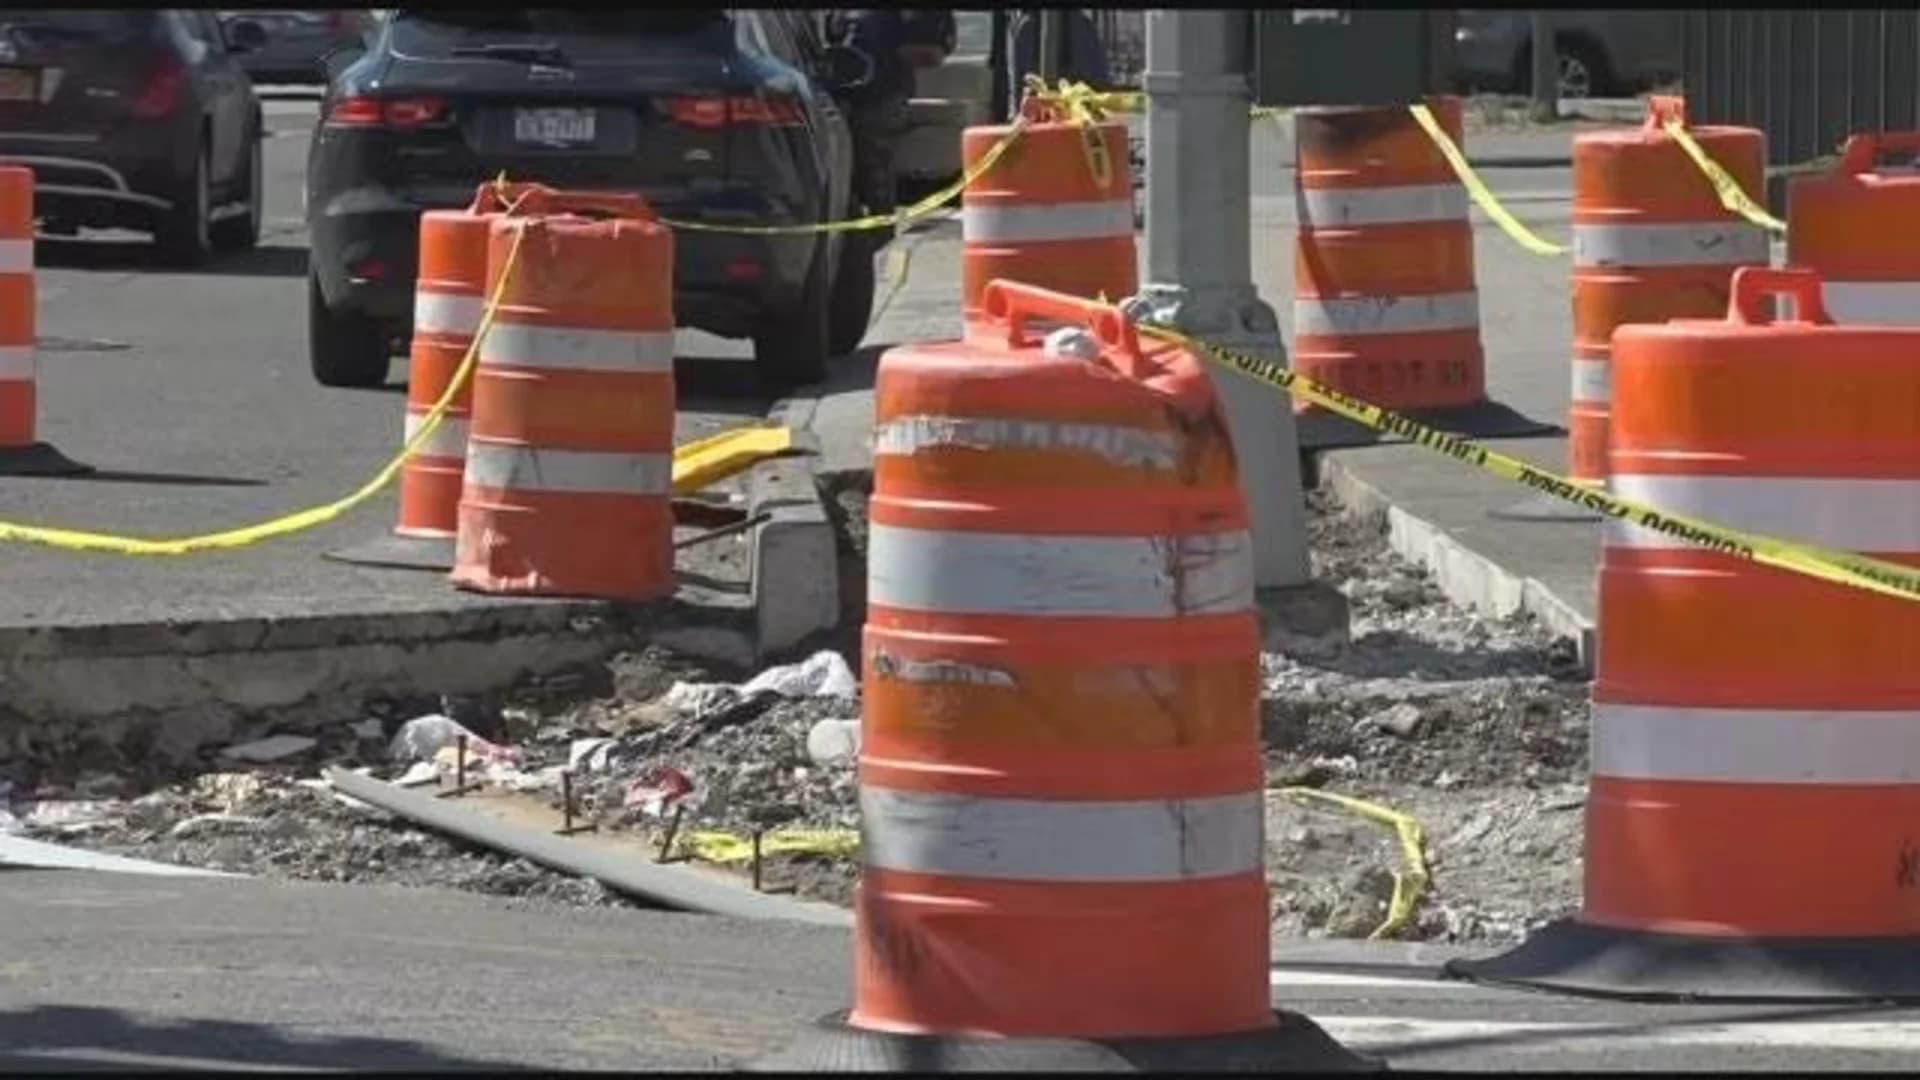 DOT: Boston Road safety work to be completed this spring